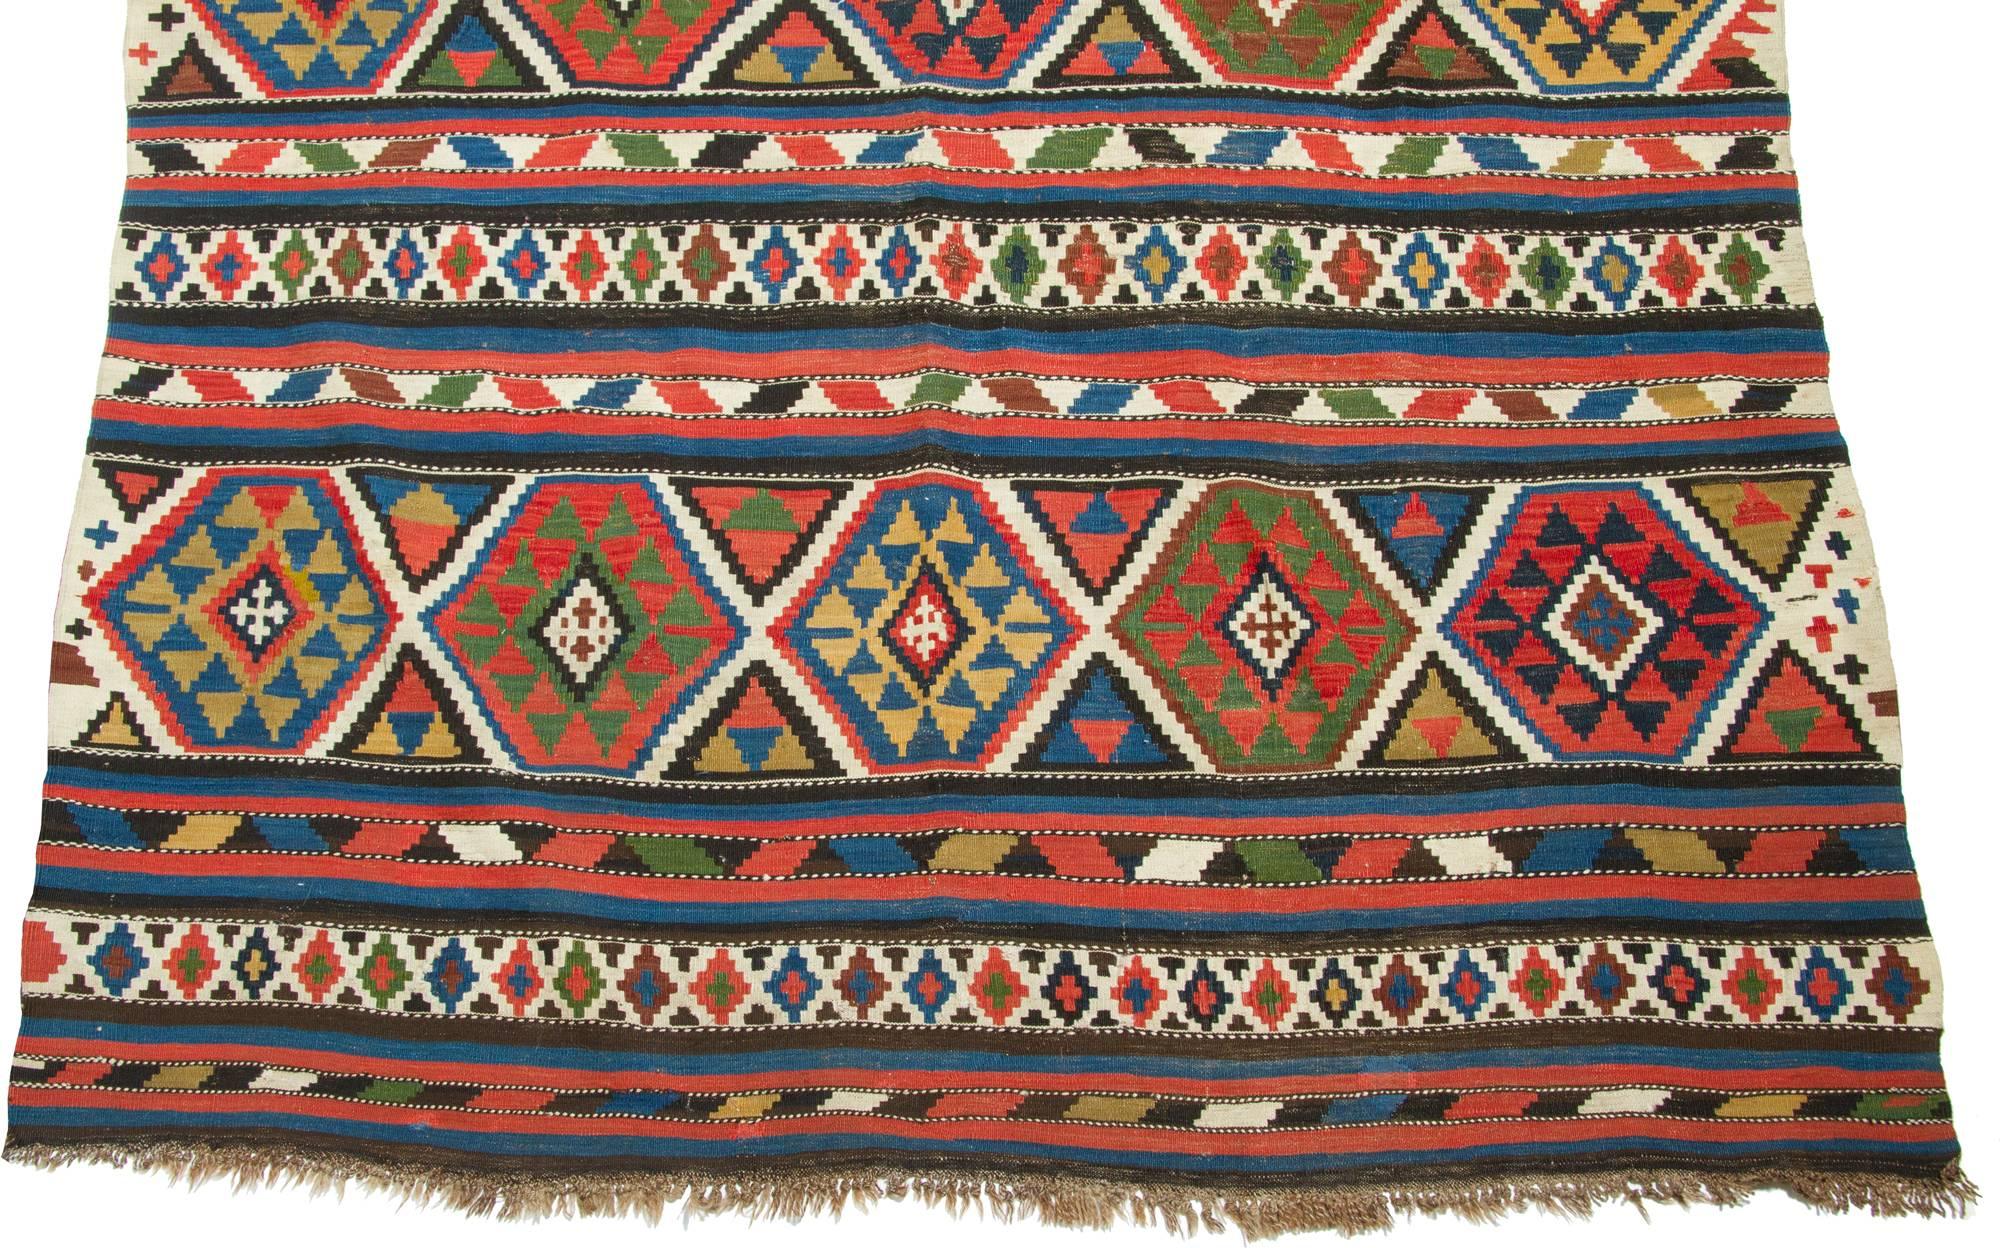 This antique Shirvan rug has an interesting pattern woven with naturally dyed wool.